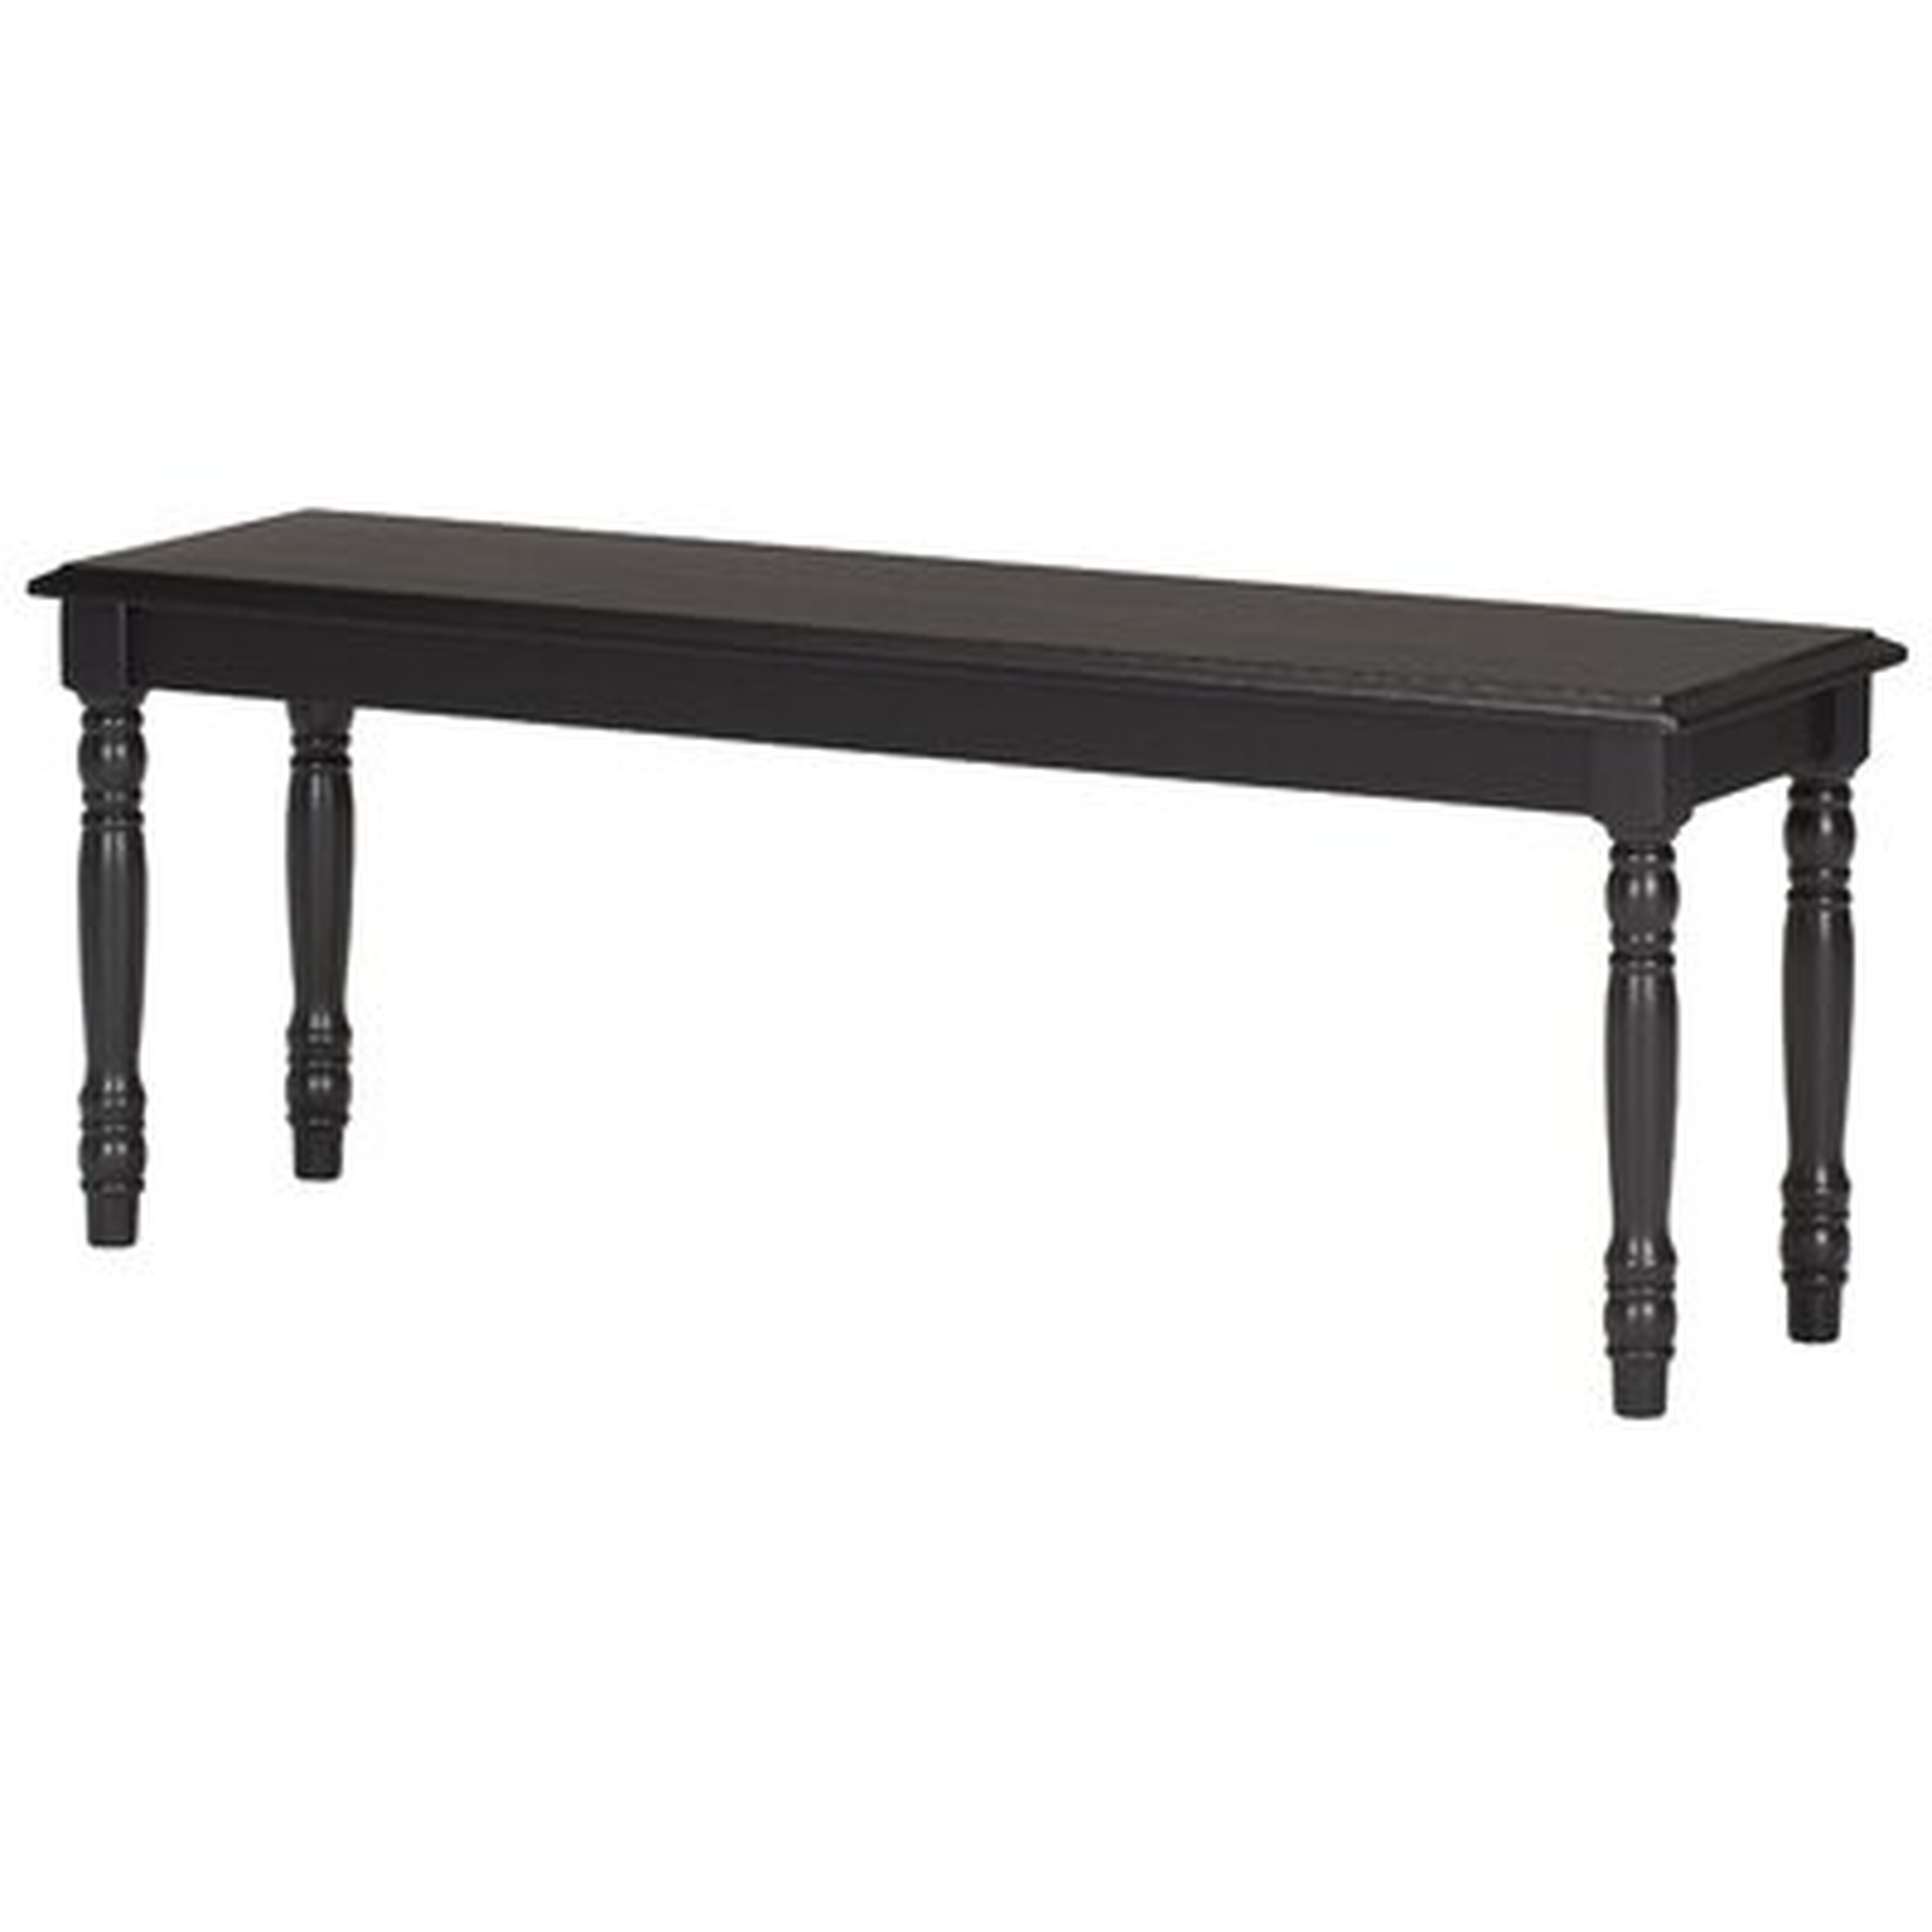 Courtdale Wood Bench - Wayfair